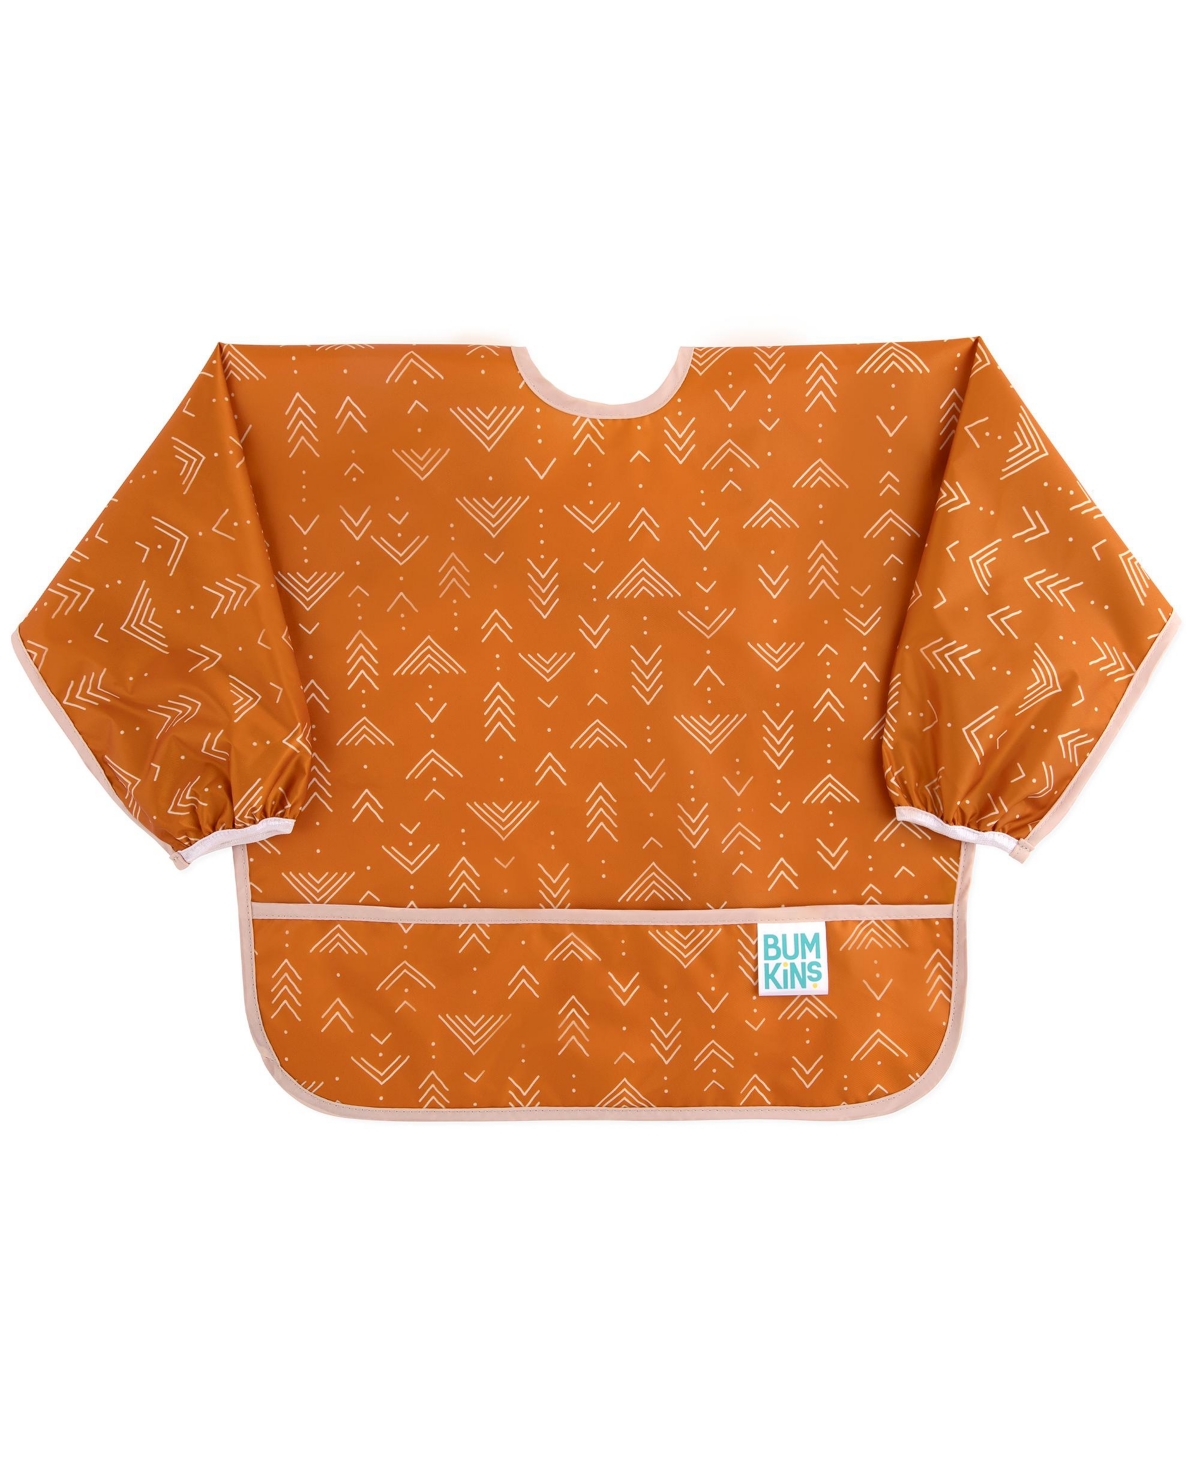 Bumkins Baby Boys And Girls Water-resistant Sleeved Bib In Grounded